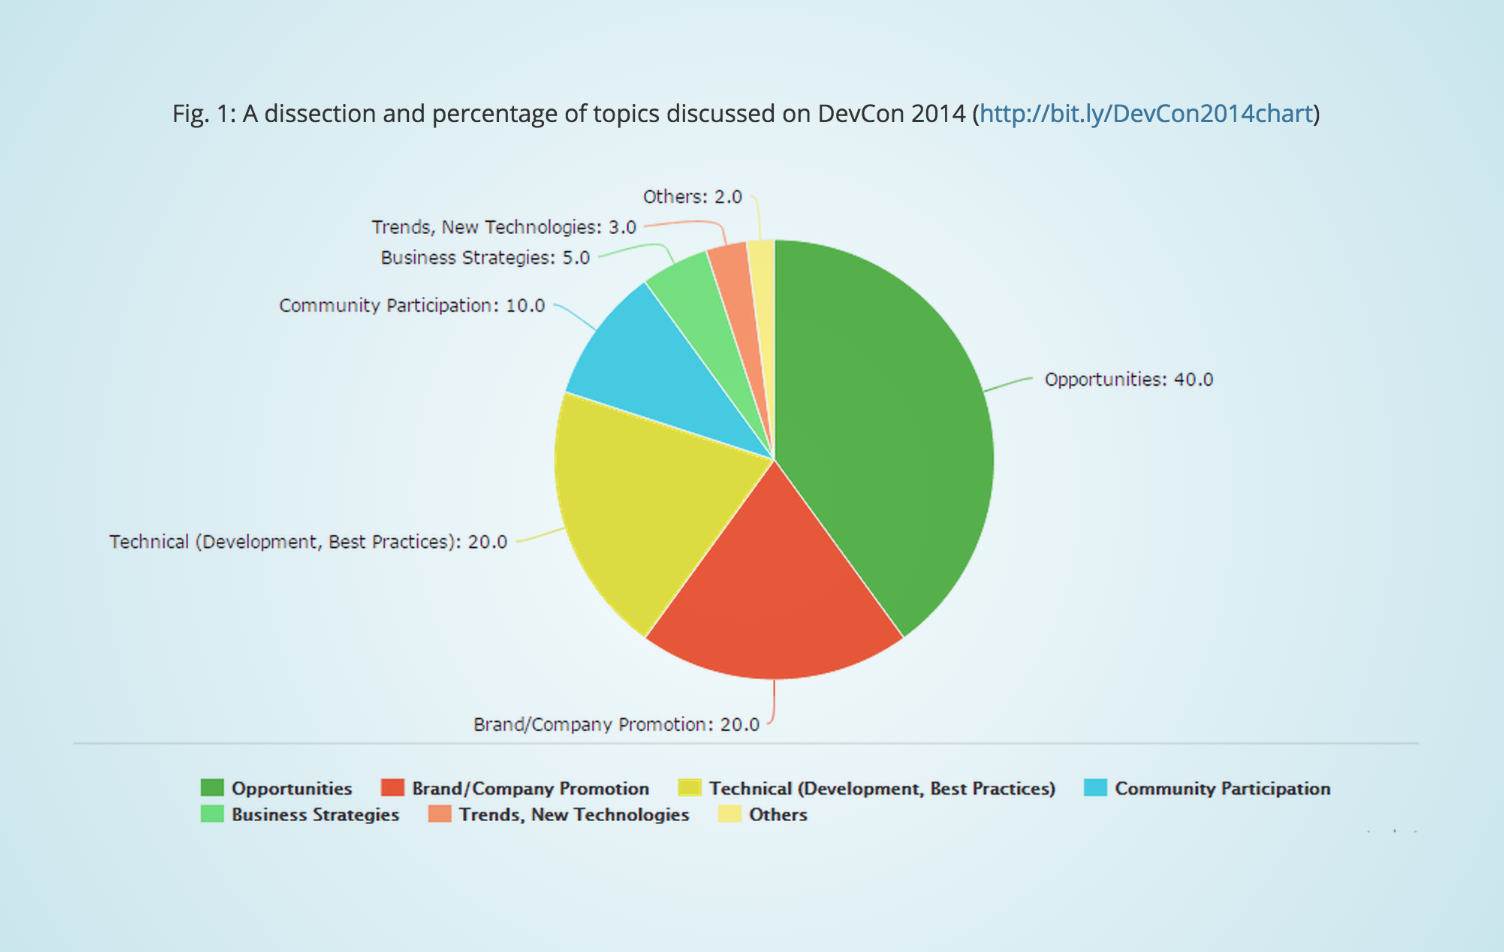 A dissection of the topics discussed on DevCon 2014